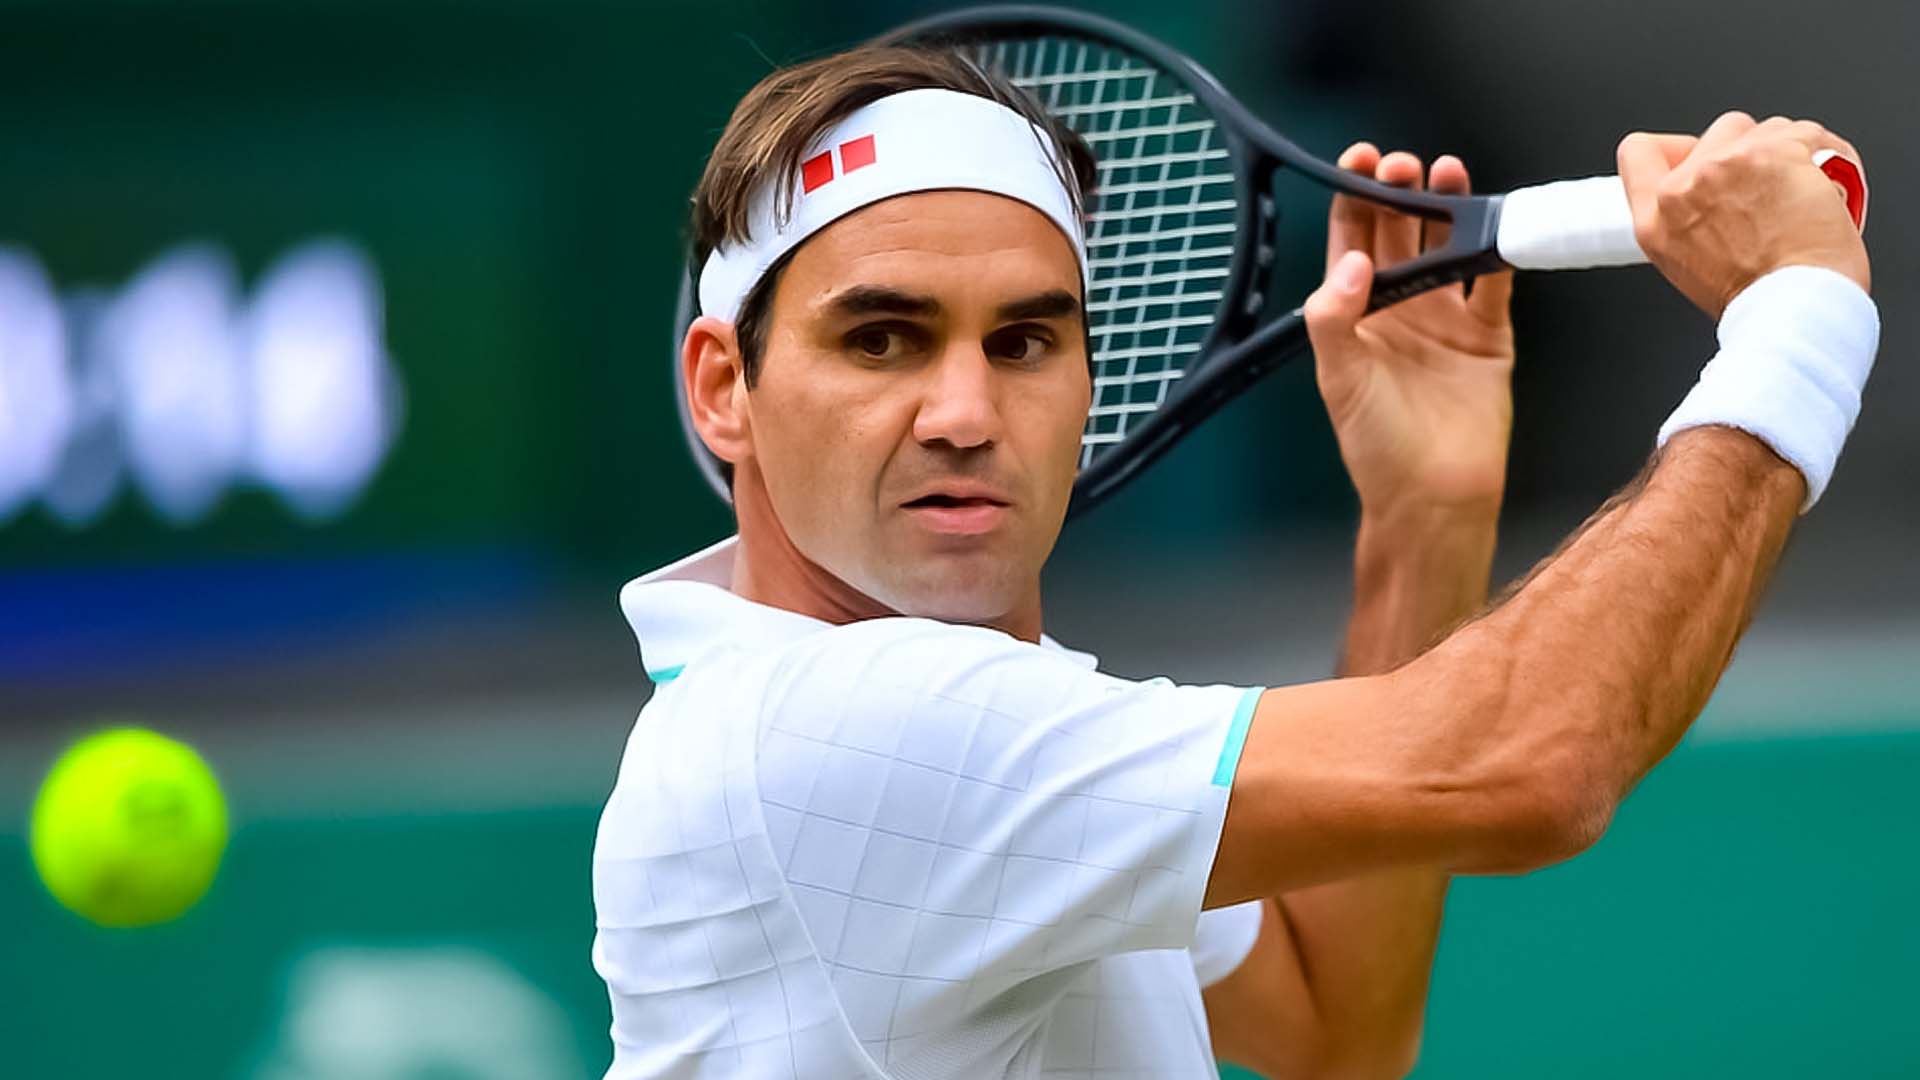 Tennis legend Roger Federer will retire after the Laver Cup